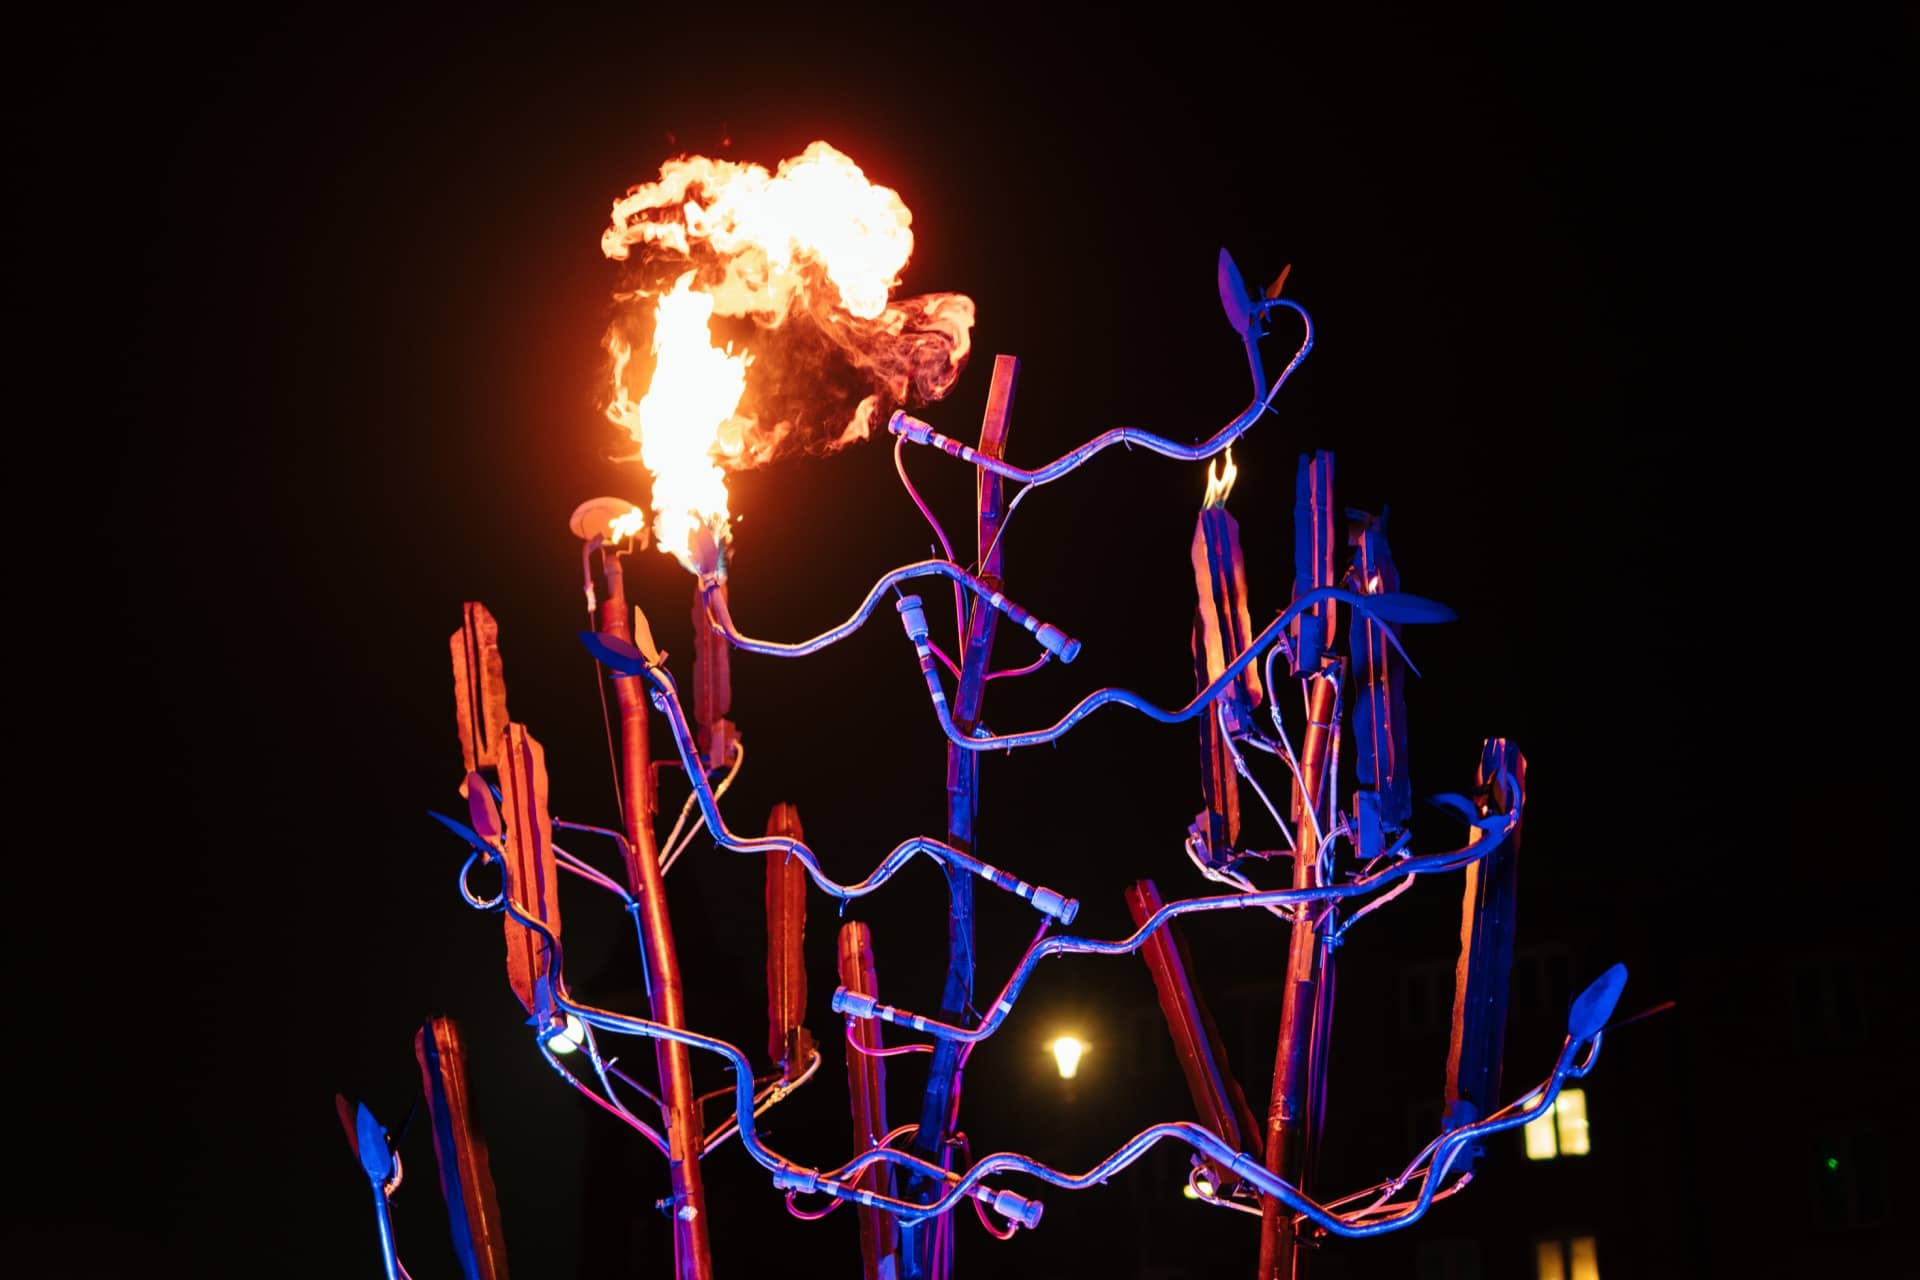 A fire on-top of a sculpture at a show in Great Yarmouth.